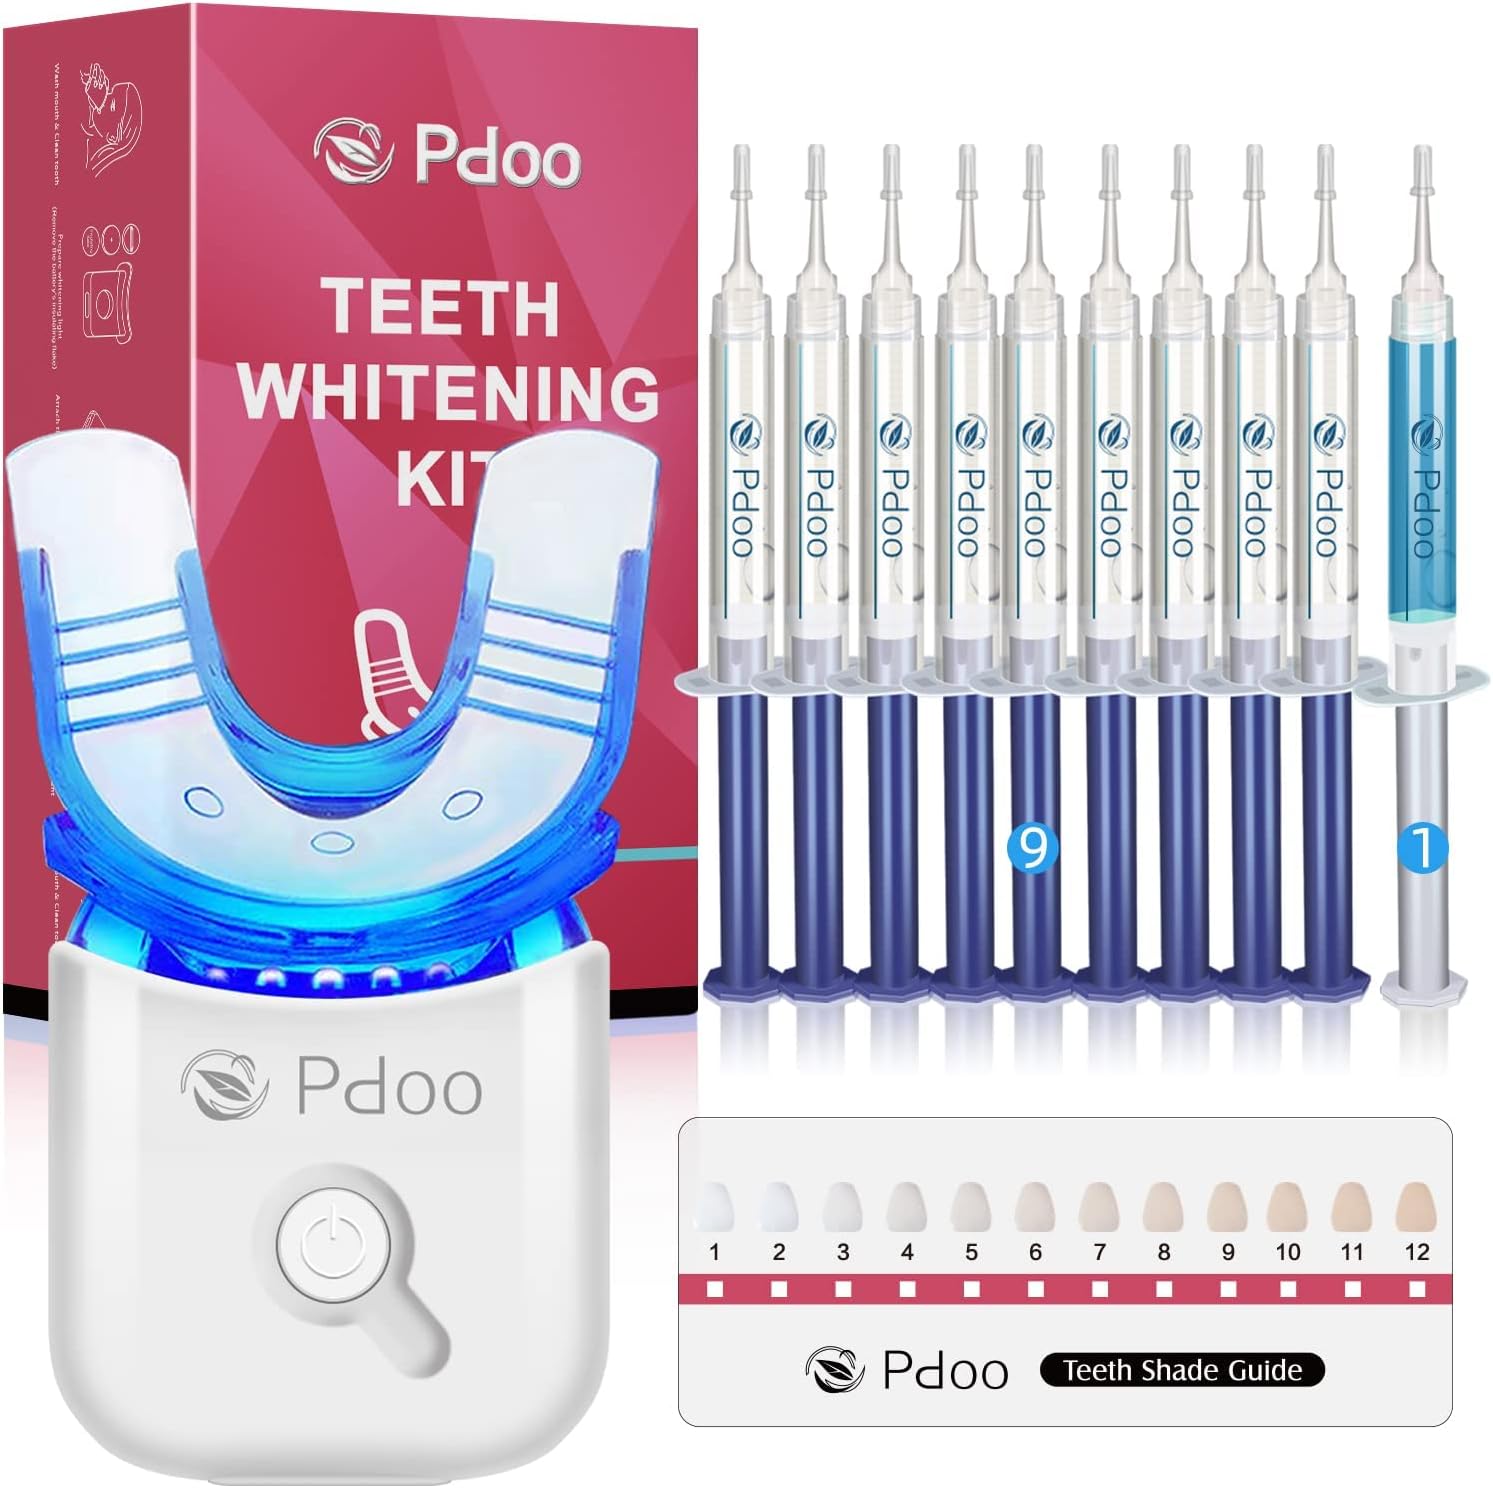 Teeth Whitening Kit with LED Lights Tray for Sensitive Teeth, 10x Whitening Pen Gel, Teeth Whitener at Home, Pain Free and Enamel Safe, Up to 1-9 Shades Whiter in 1-2 Weeks, 2-3X Faster Than Strip